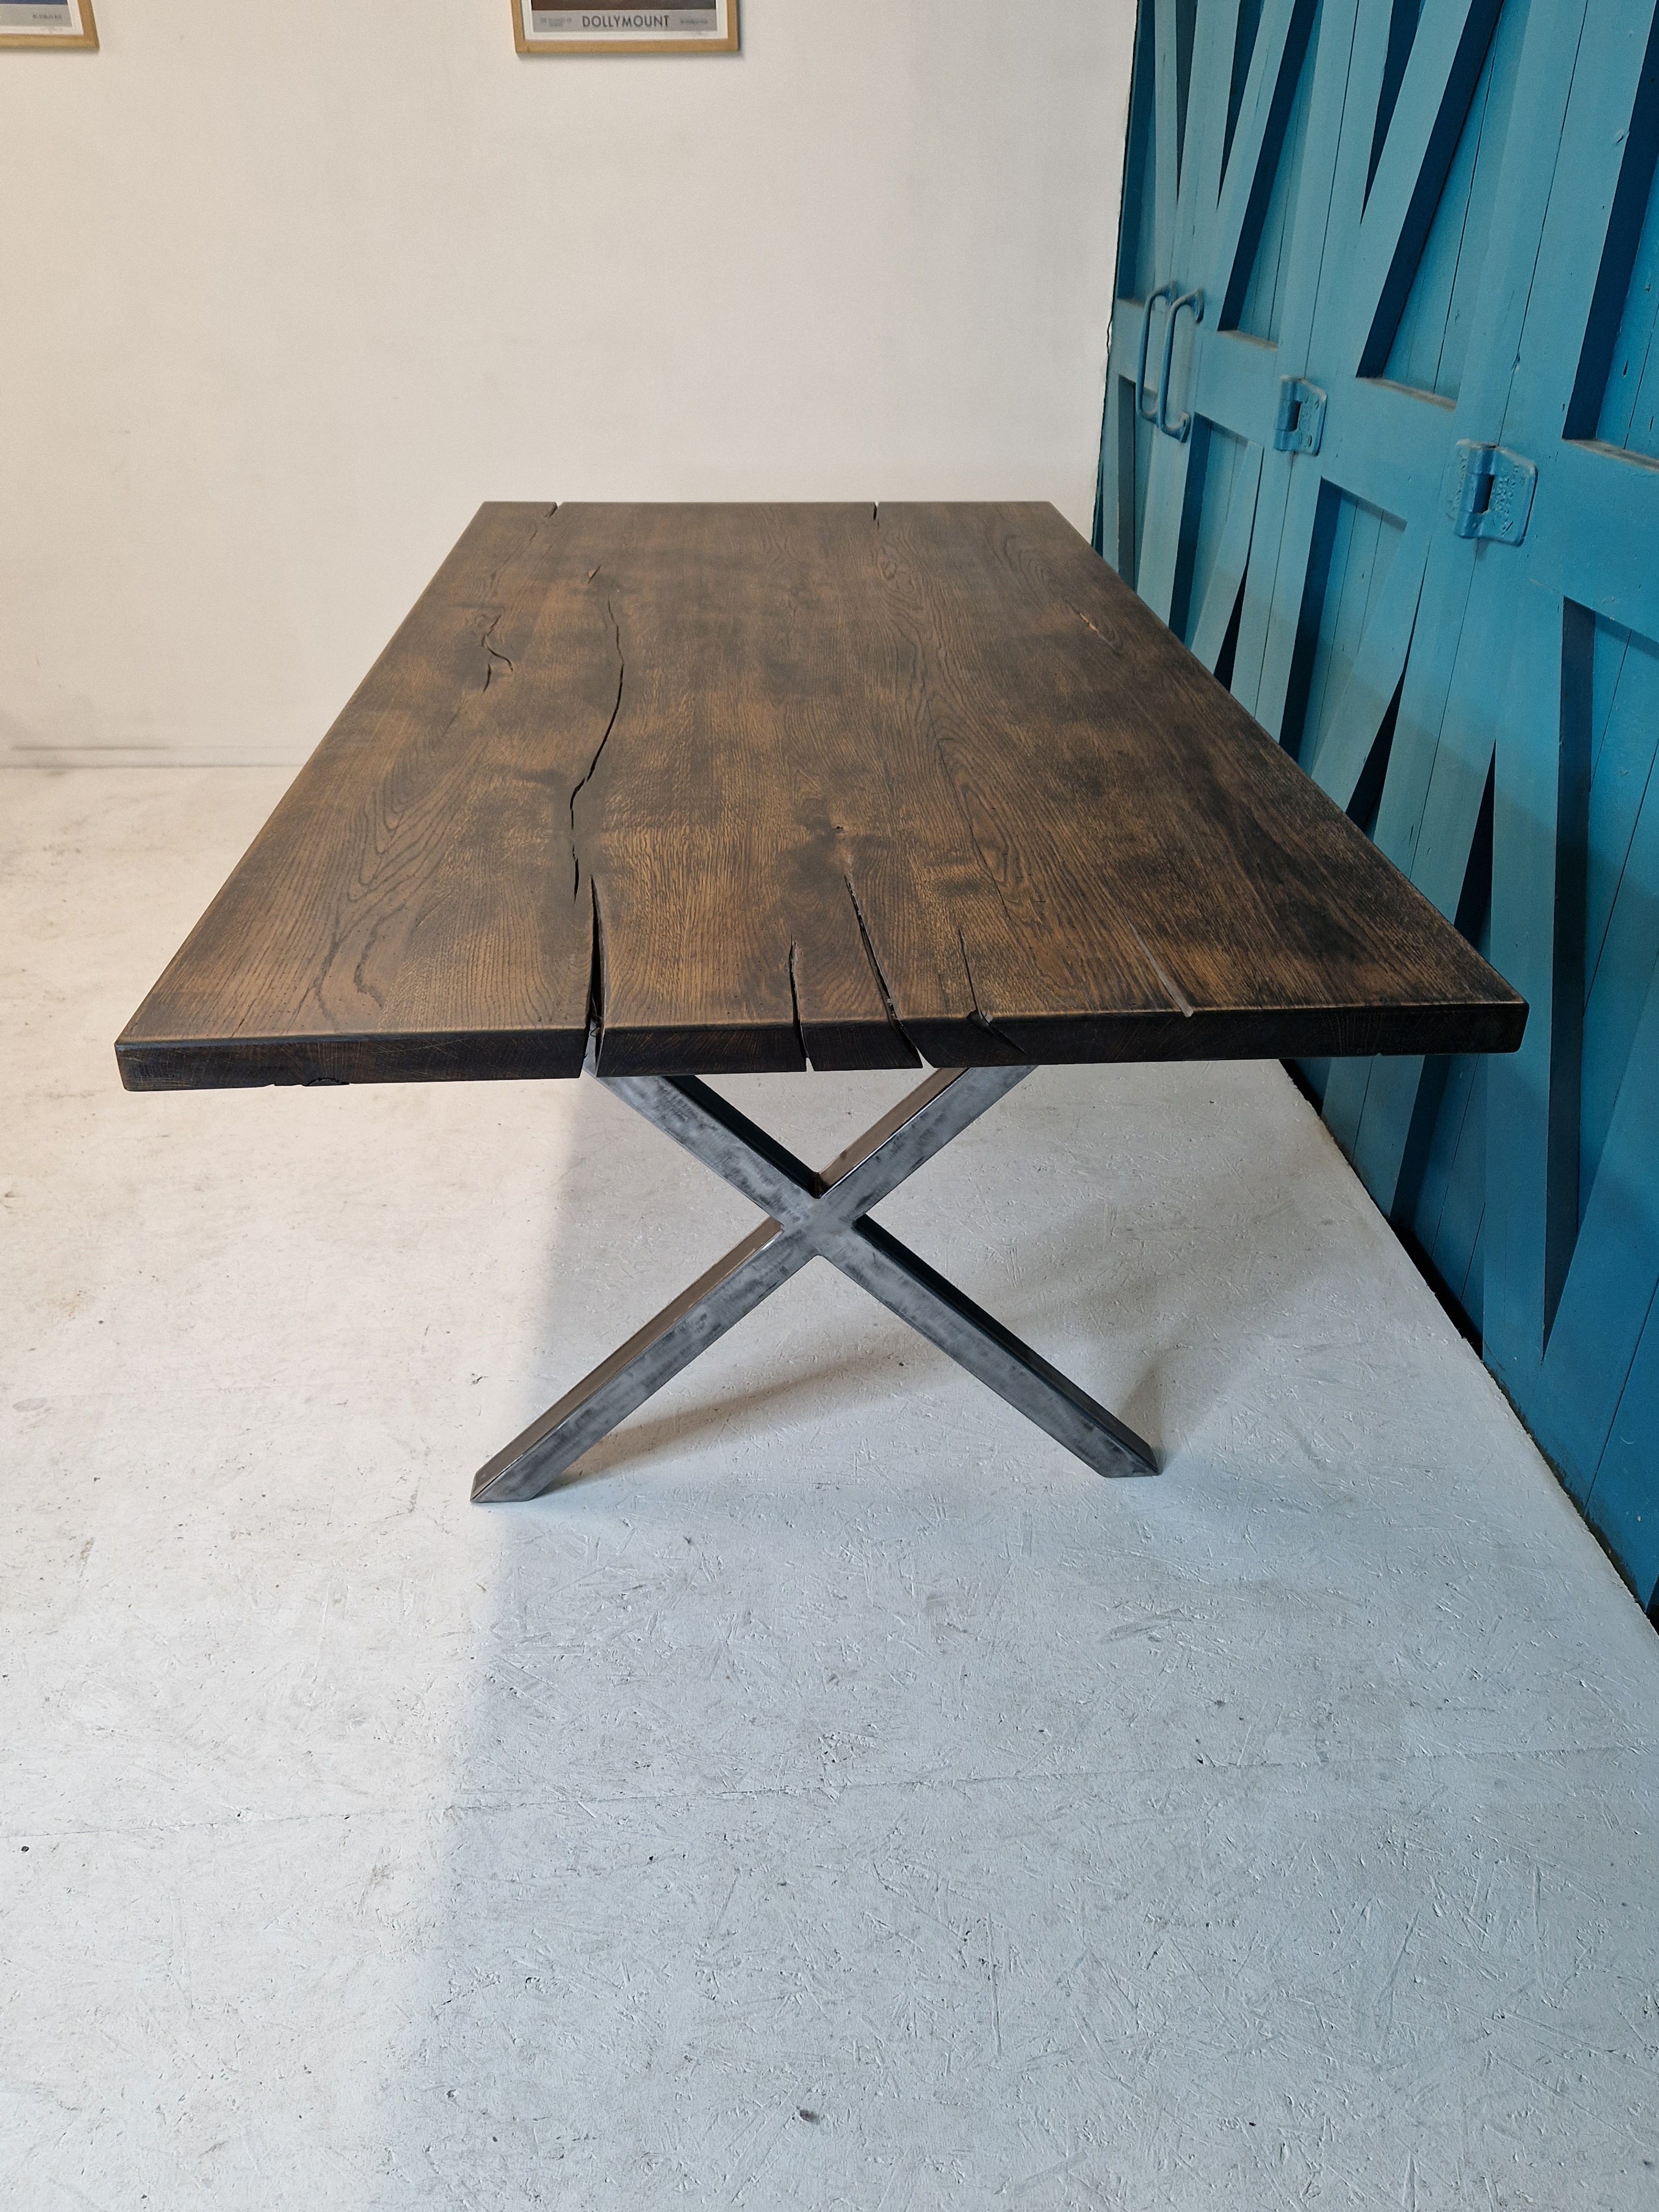 Large character dark oak dining table from reclaimed salvaged timber 2m x 1m